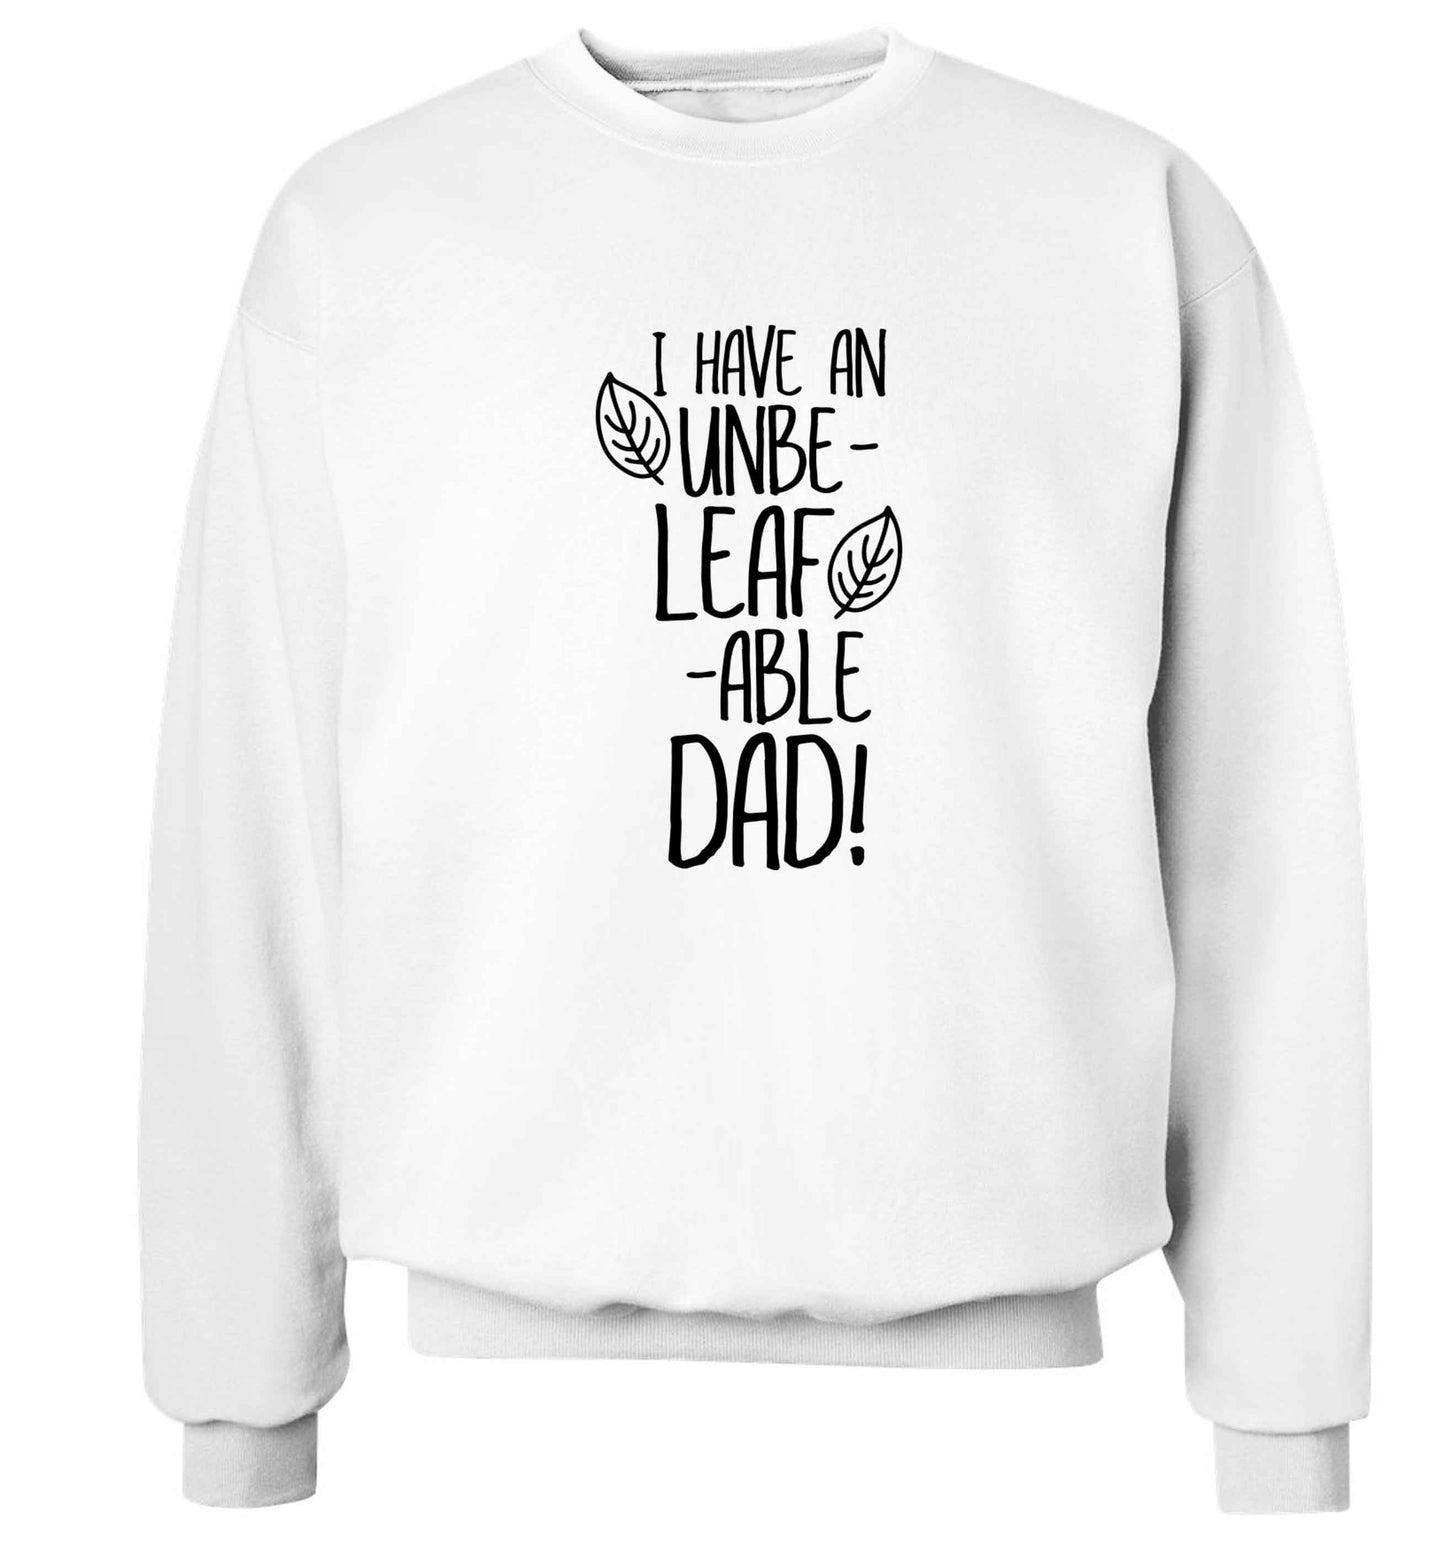 I have an unbe-leaf-able dad Adult's unisex white Sweater 2XL